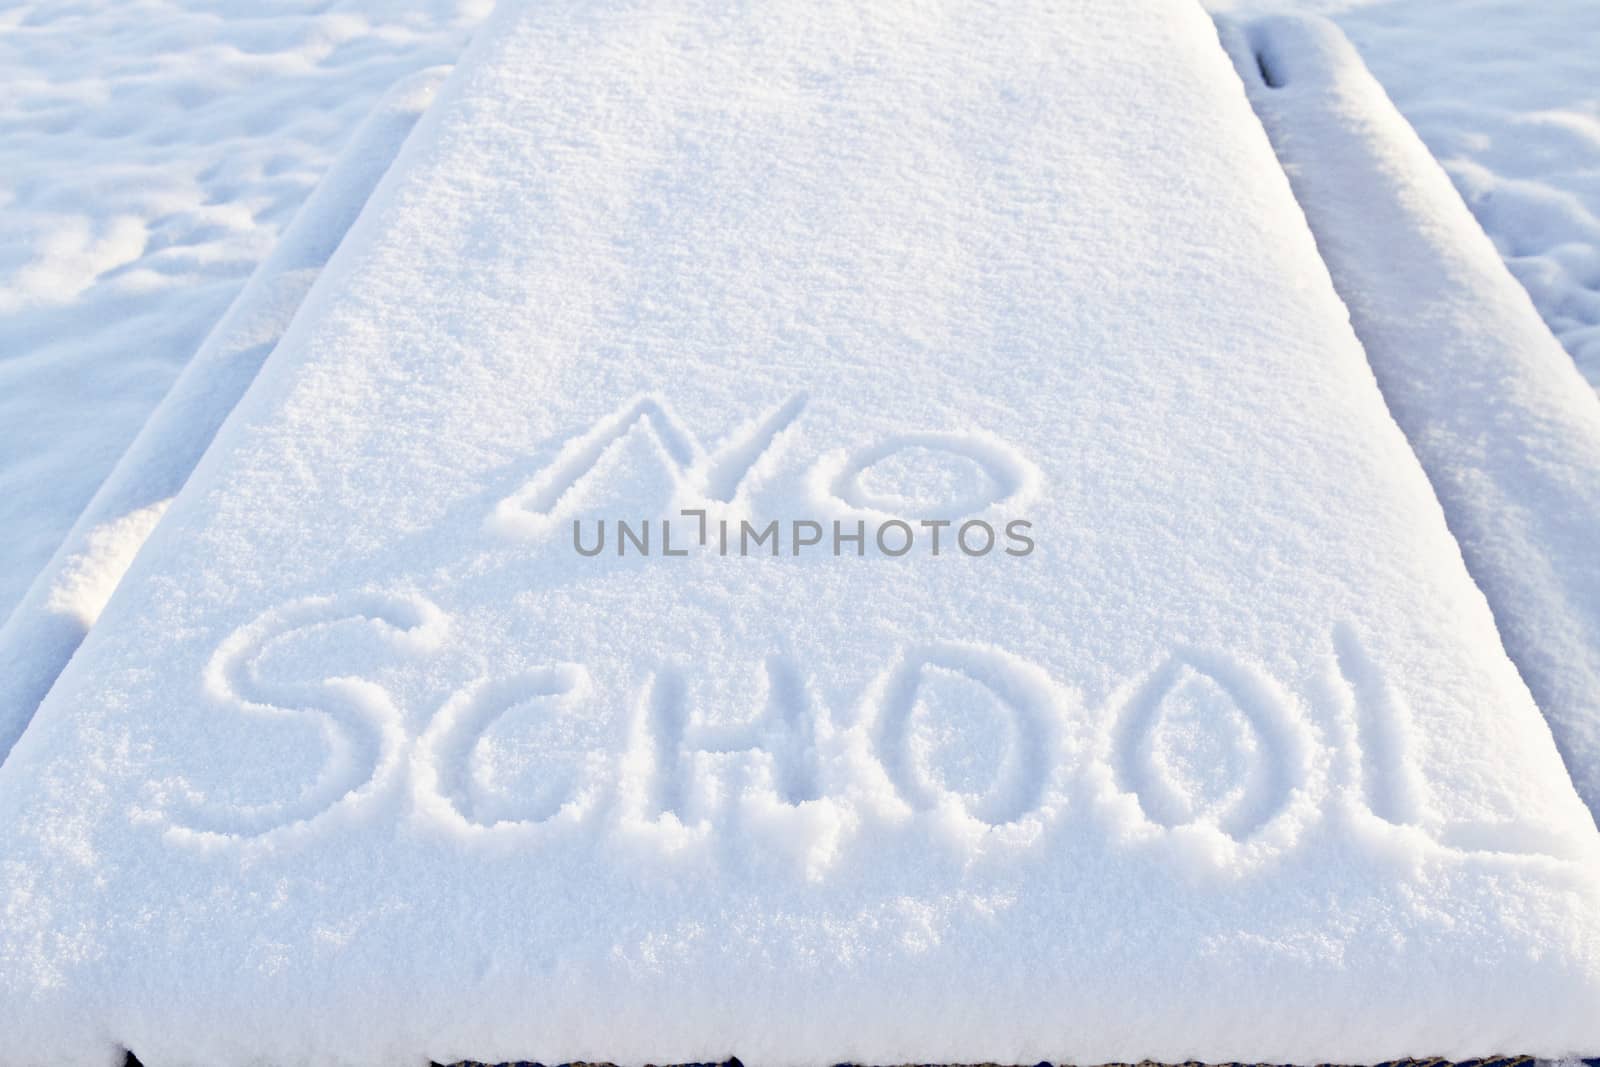 No School carefully printed in fresh snow indicates winter weather has closed local schools. 